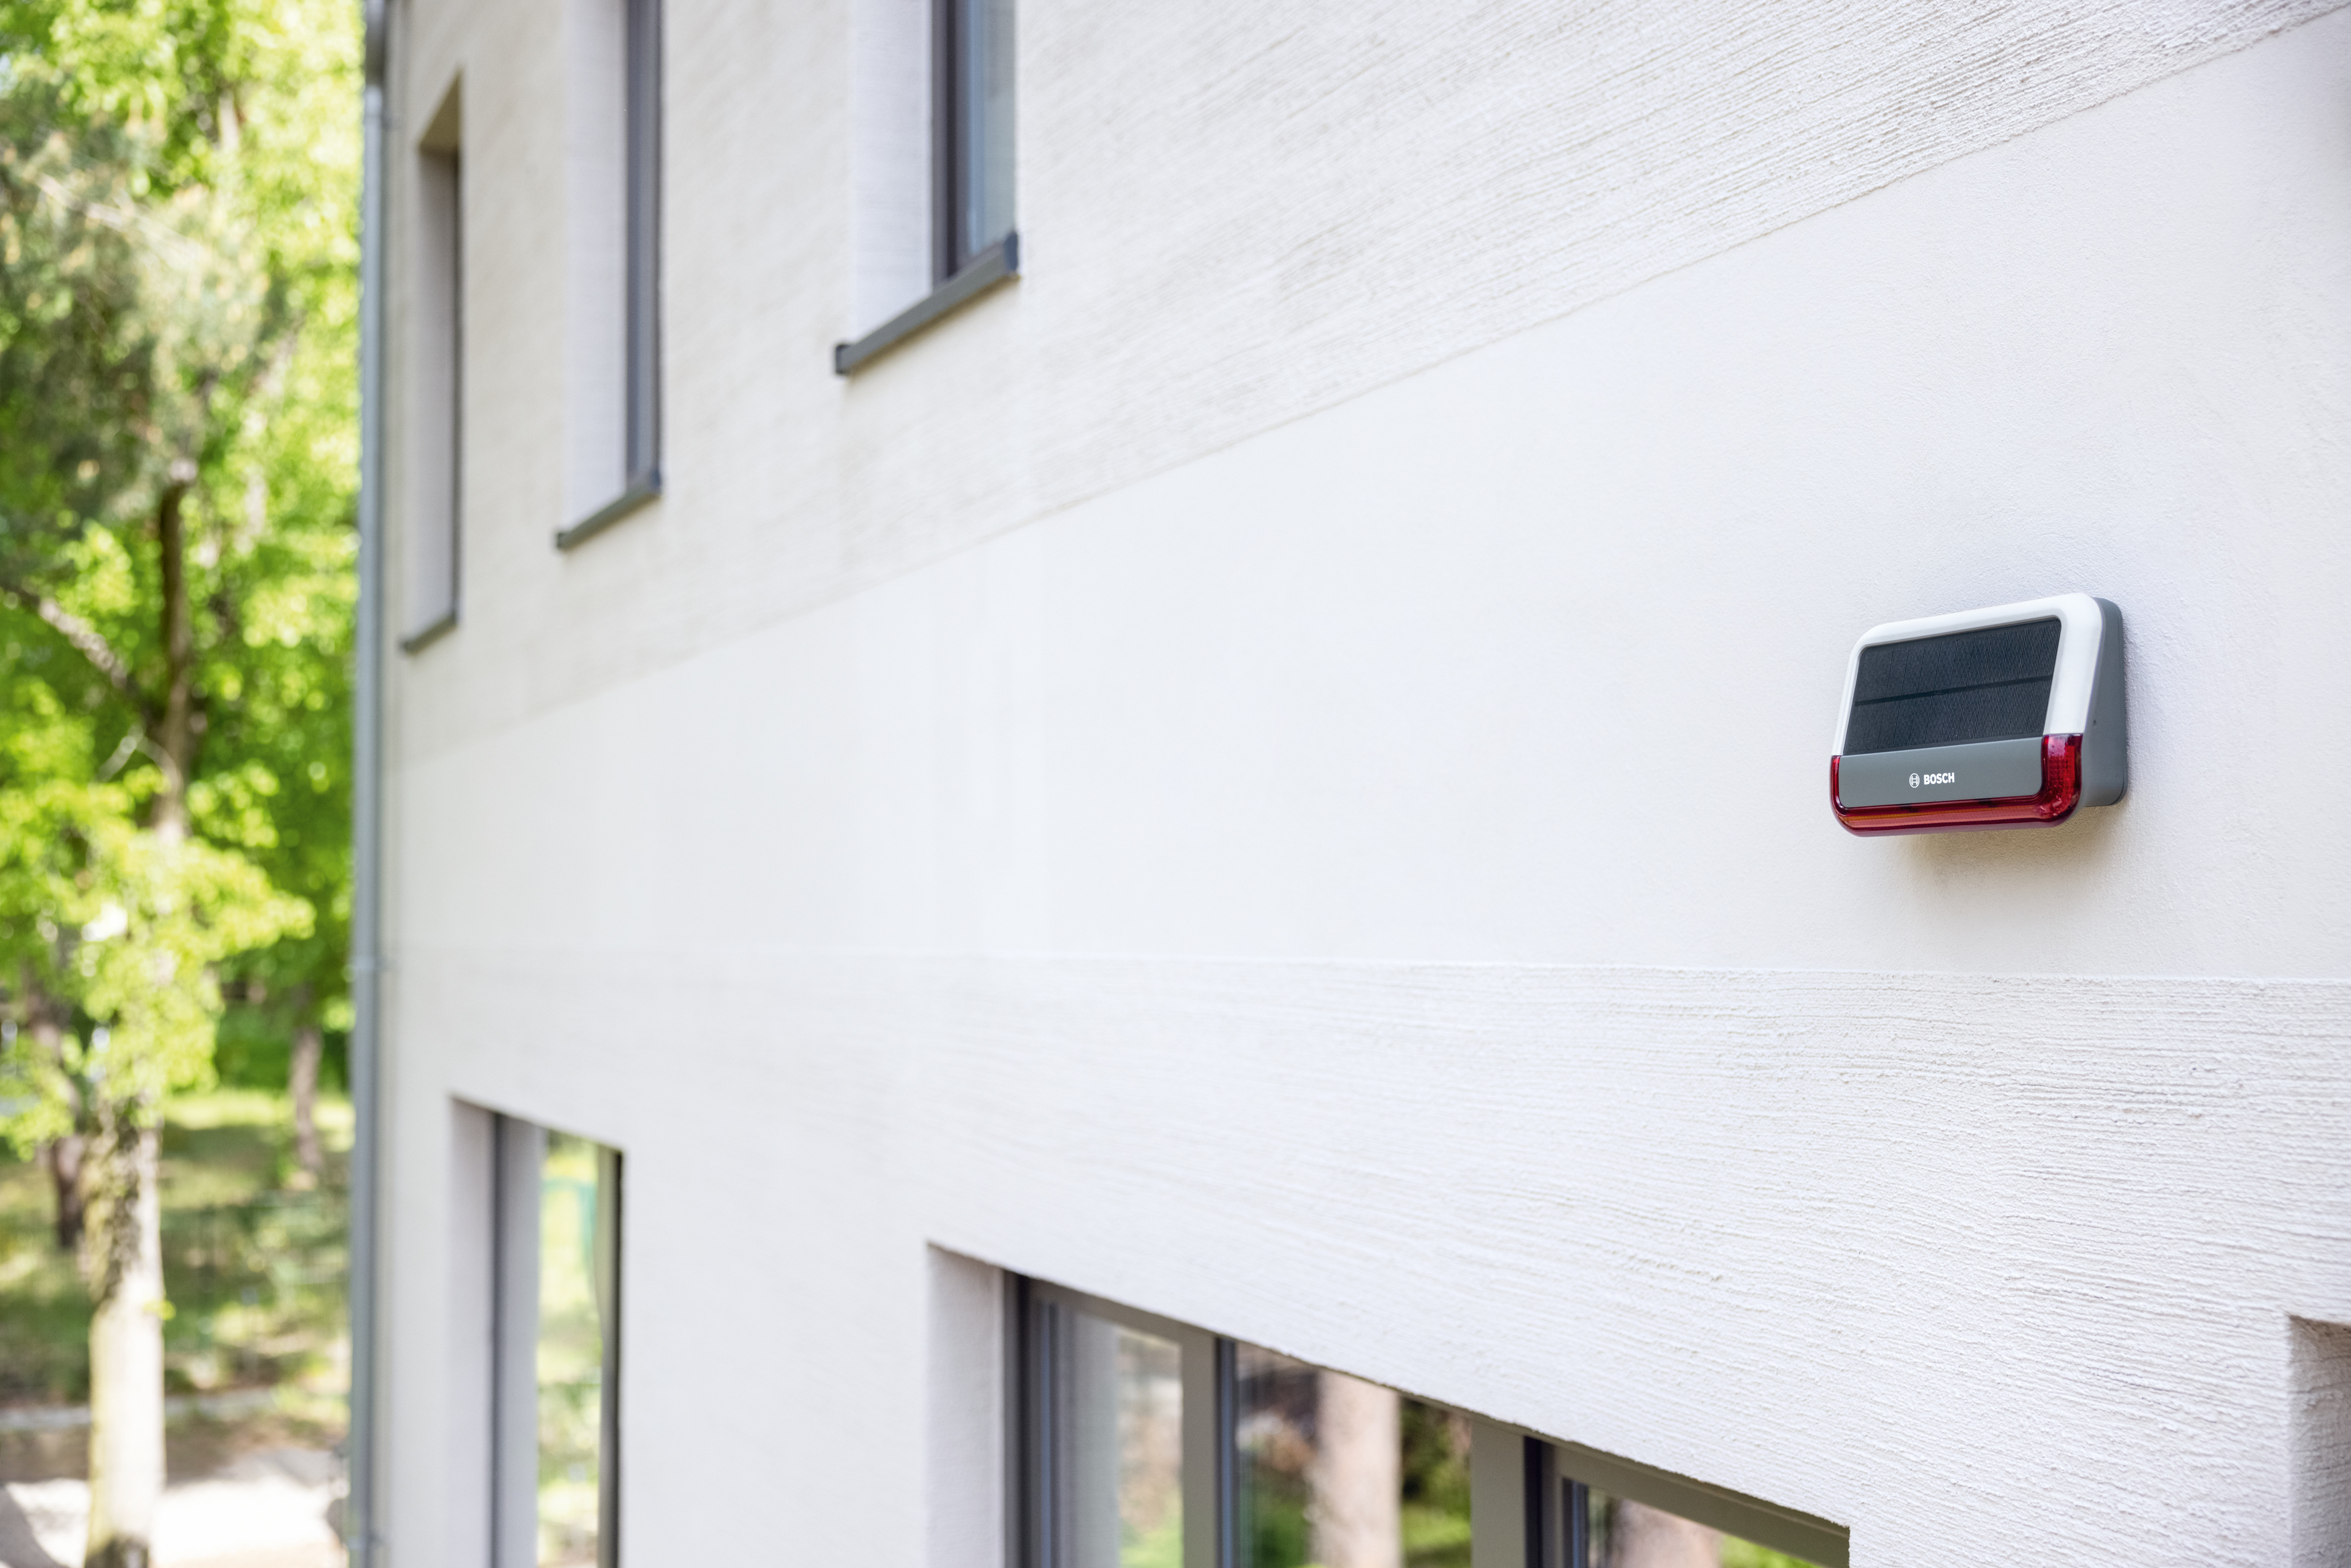 The new outdoor siren from Bosch Smart Home